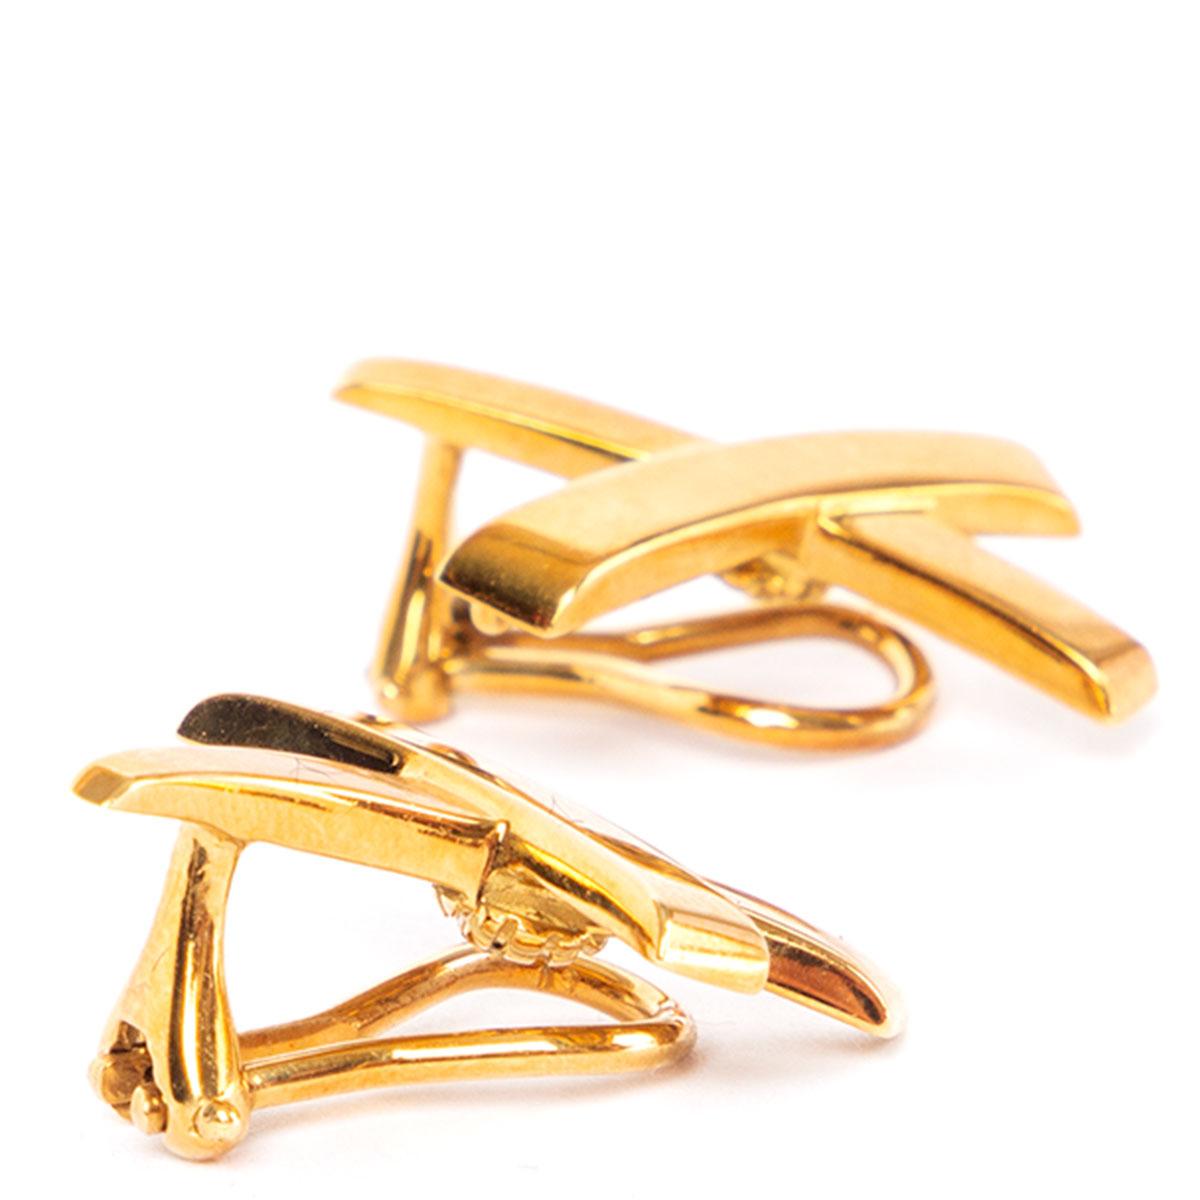 100% authentic Tiffany & Co. 1980s large Paloma Picasso 18 Kt. Gold Graffiti X clip earrings. Fully signed Paloma Picasso and Tiffany & Co. From the iconic 1980's Graffiti X collection. Have been worn and are in excellent condition. Come with box.